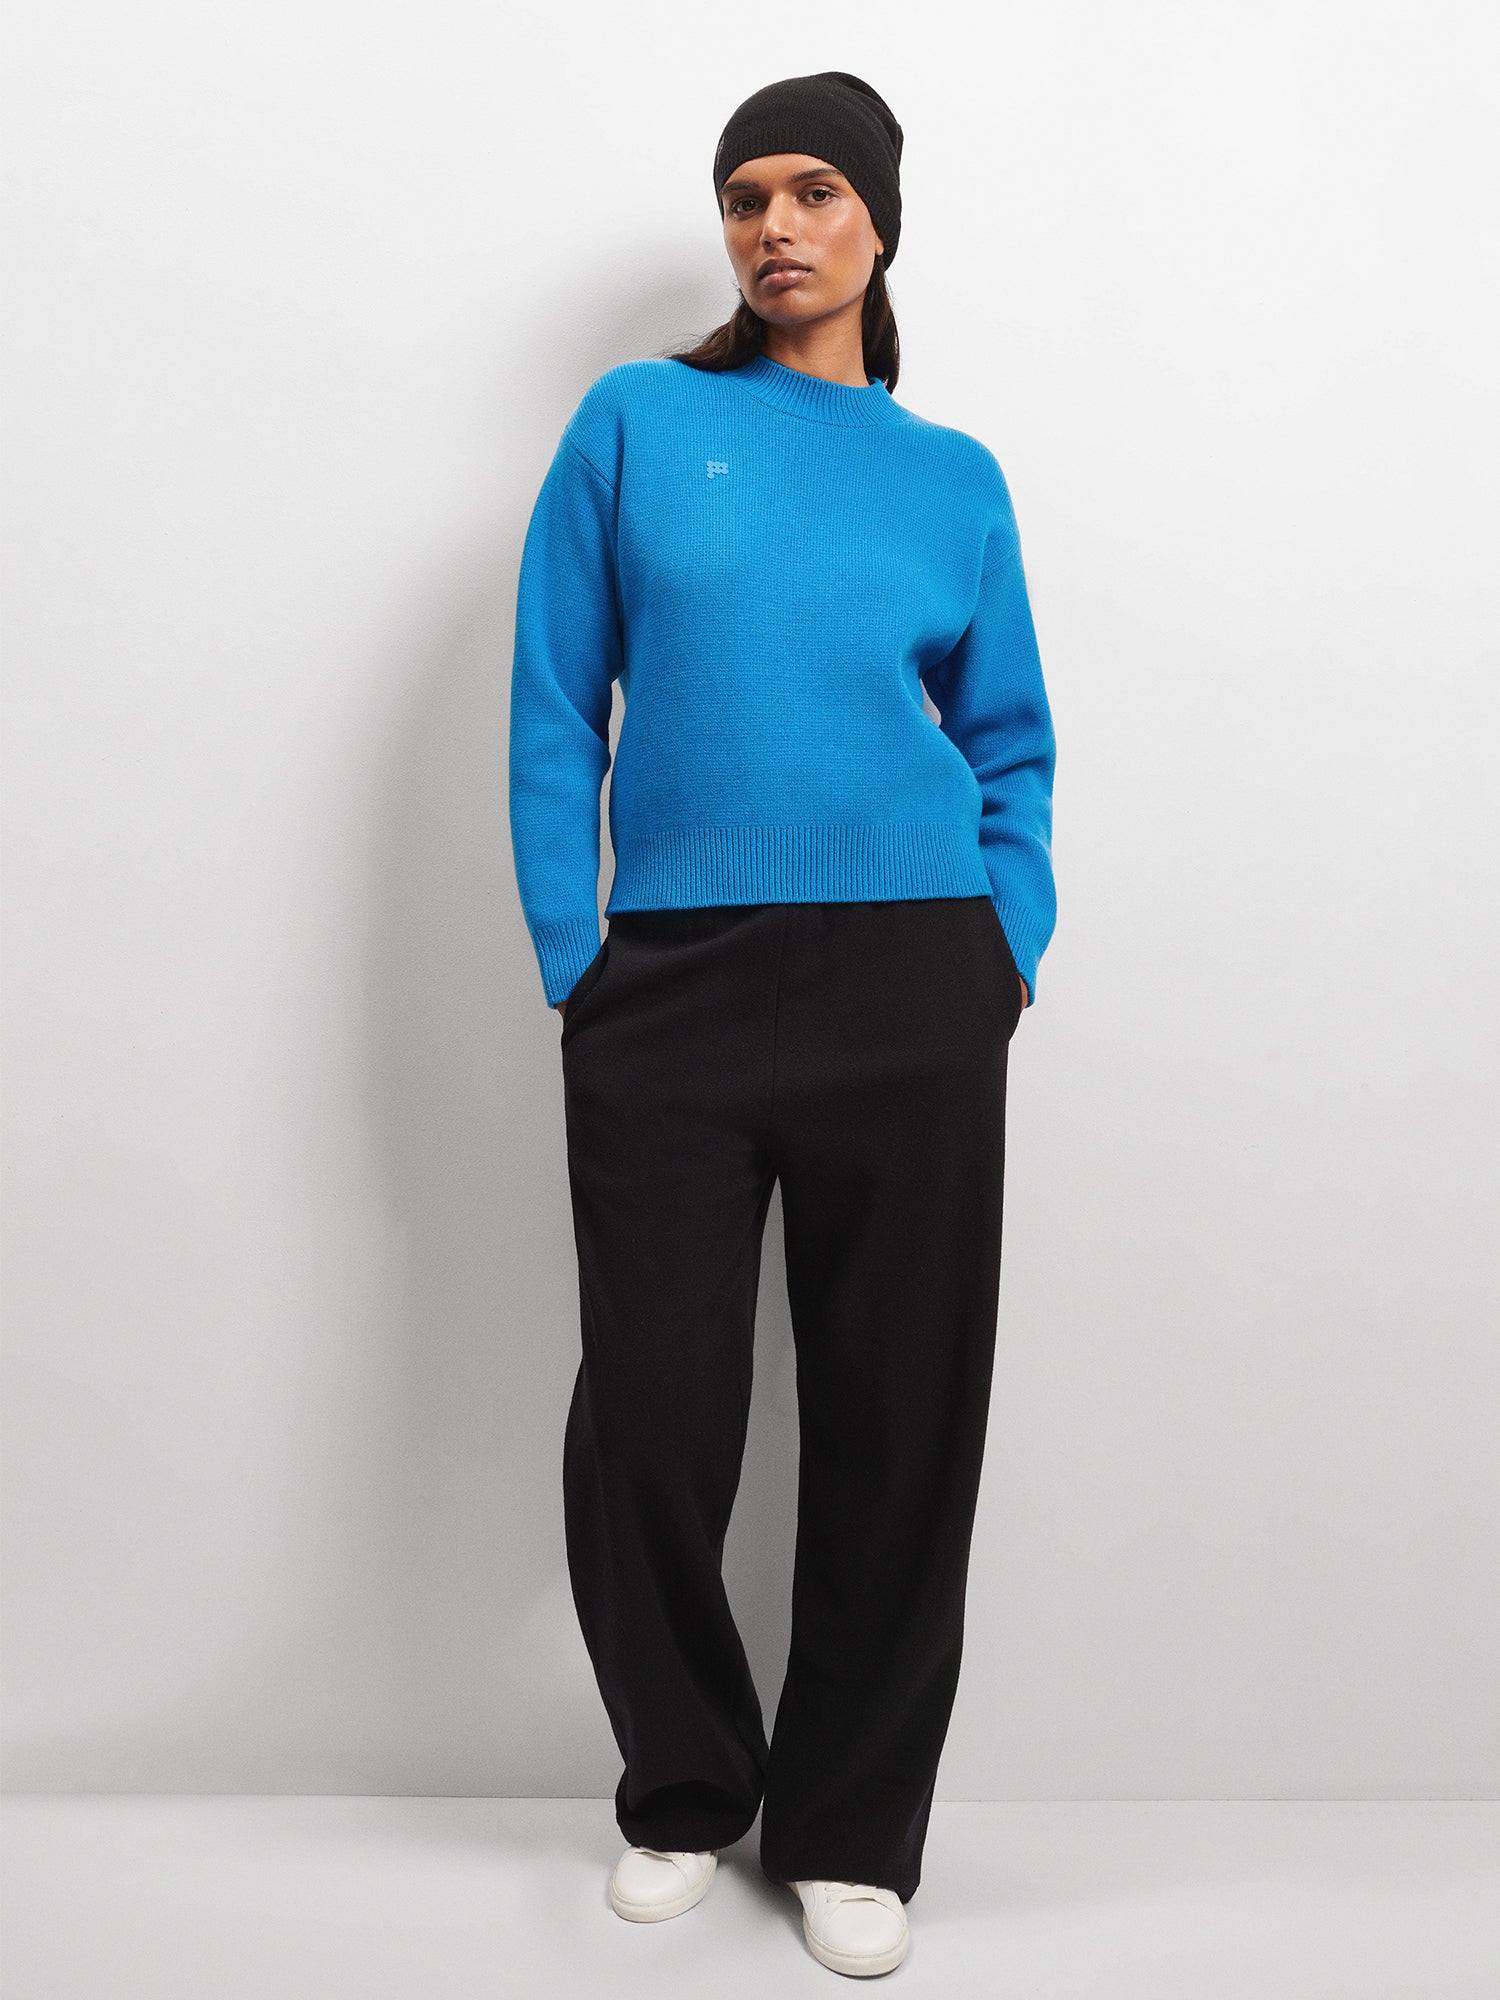 Recycled_Cashmere_Knit_Crew_NeckSweater_Cerulean_Blue-female-4